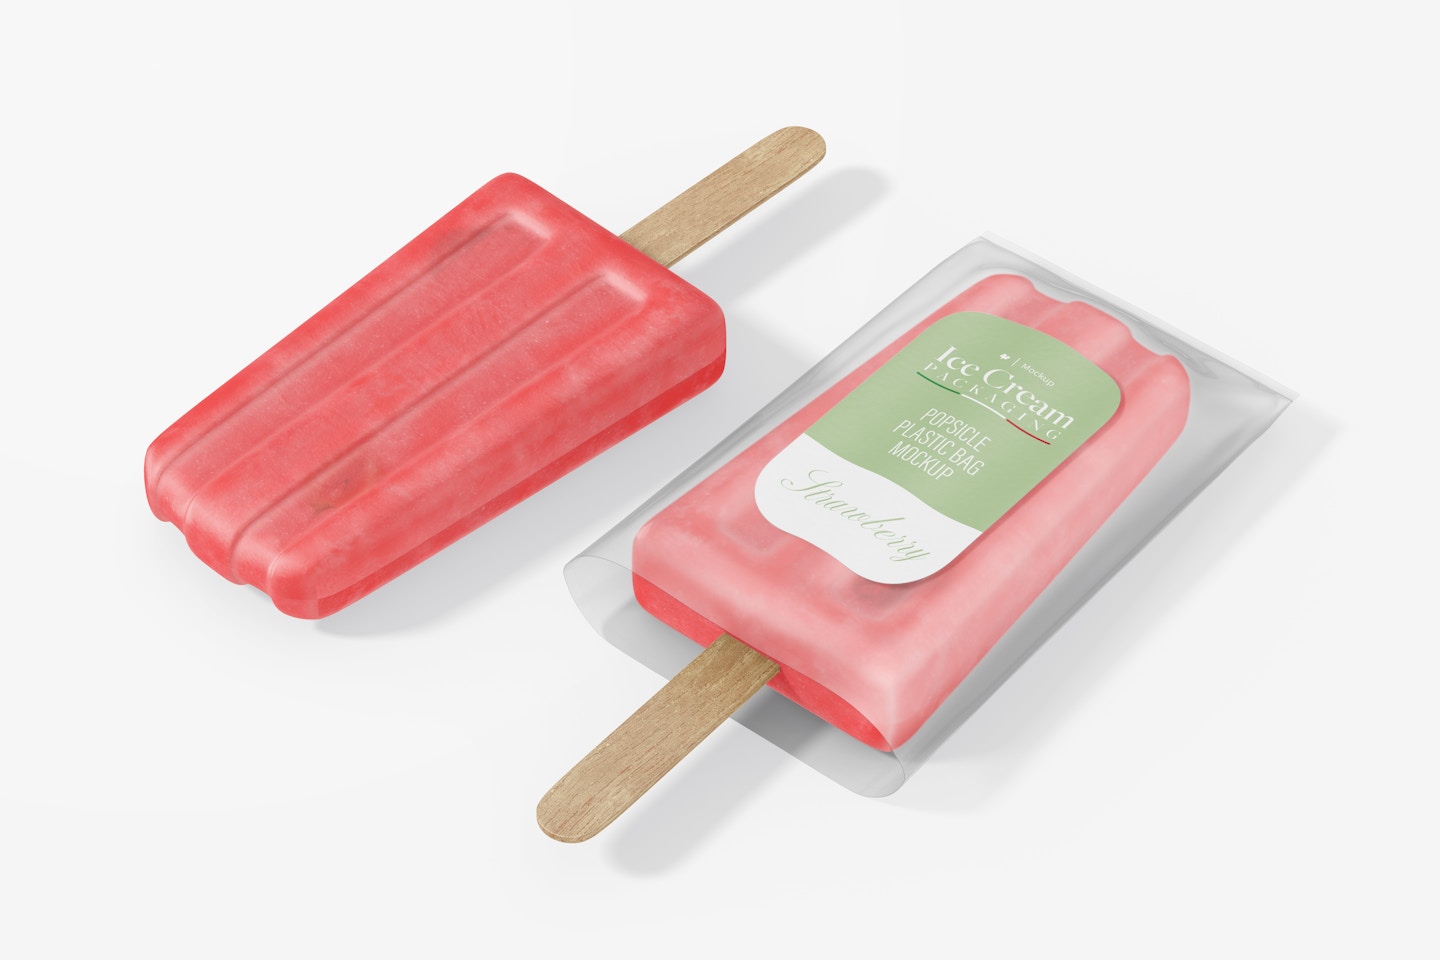 Popsicle Plastic Bags with Tag Mockup, Perspective